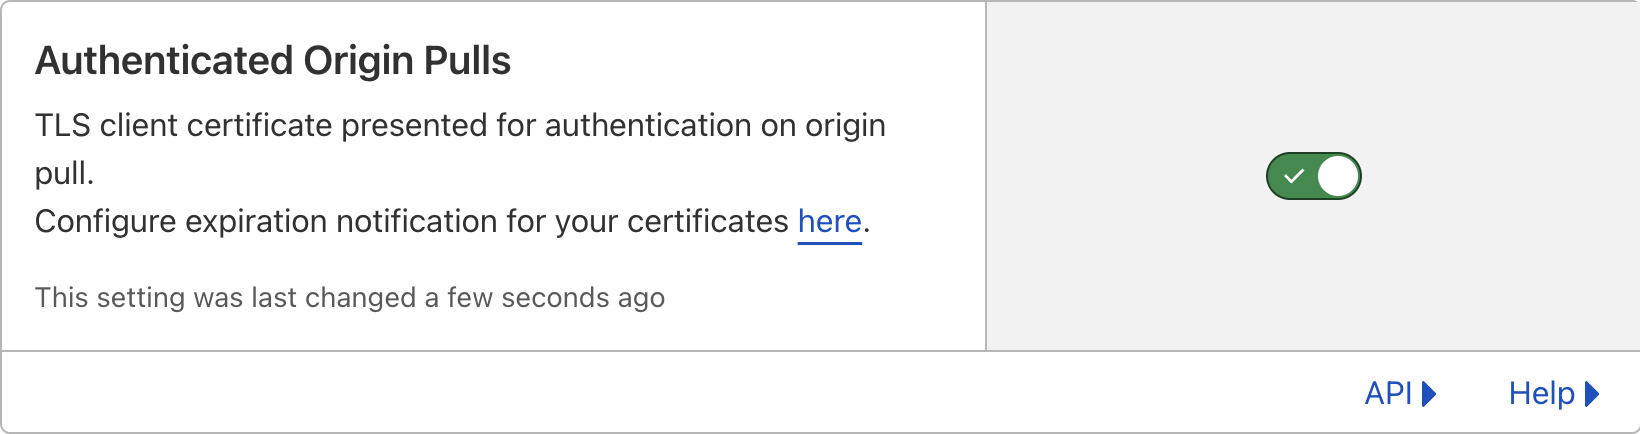 Toggled switch for Cloudflare authenticated origin pulls